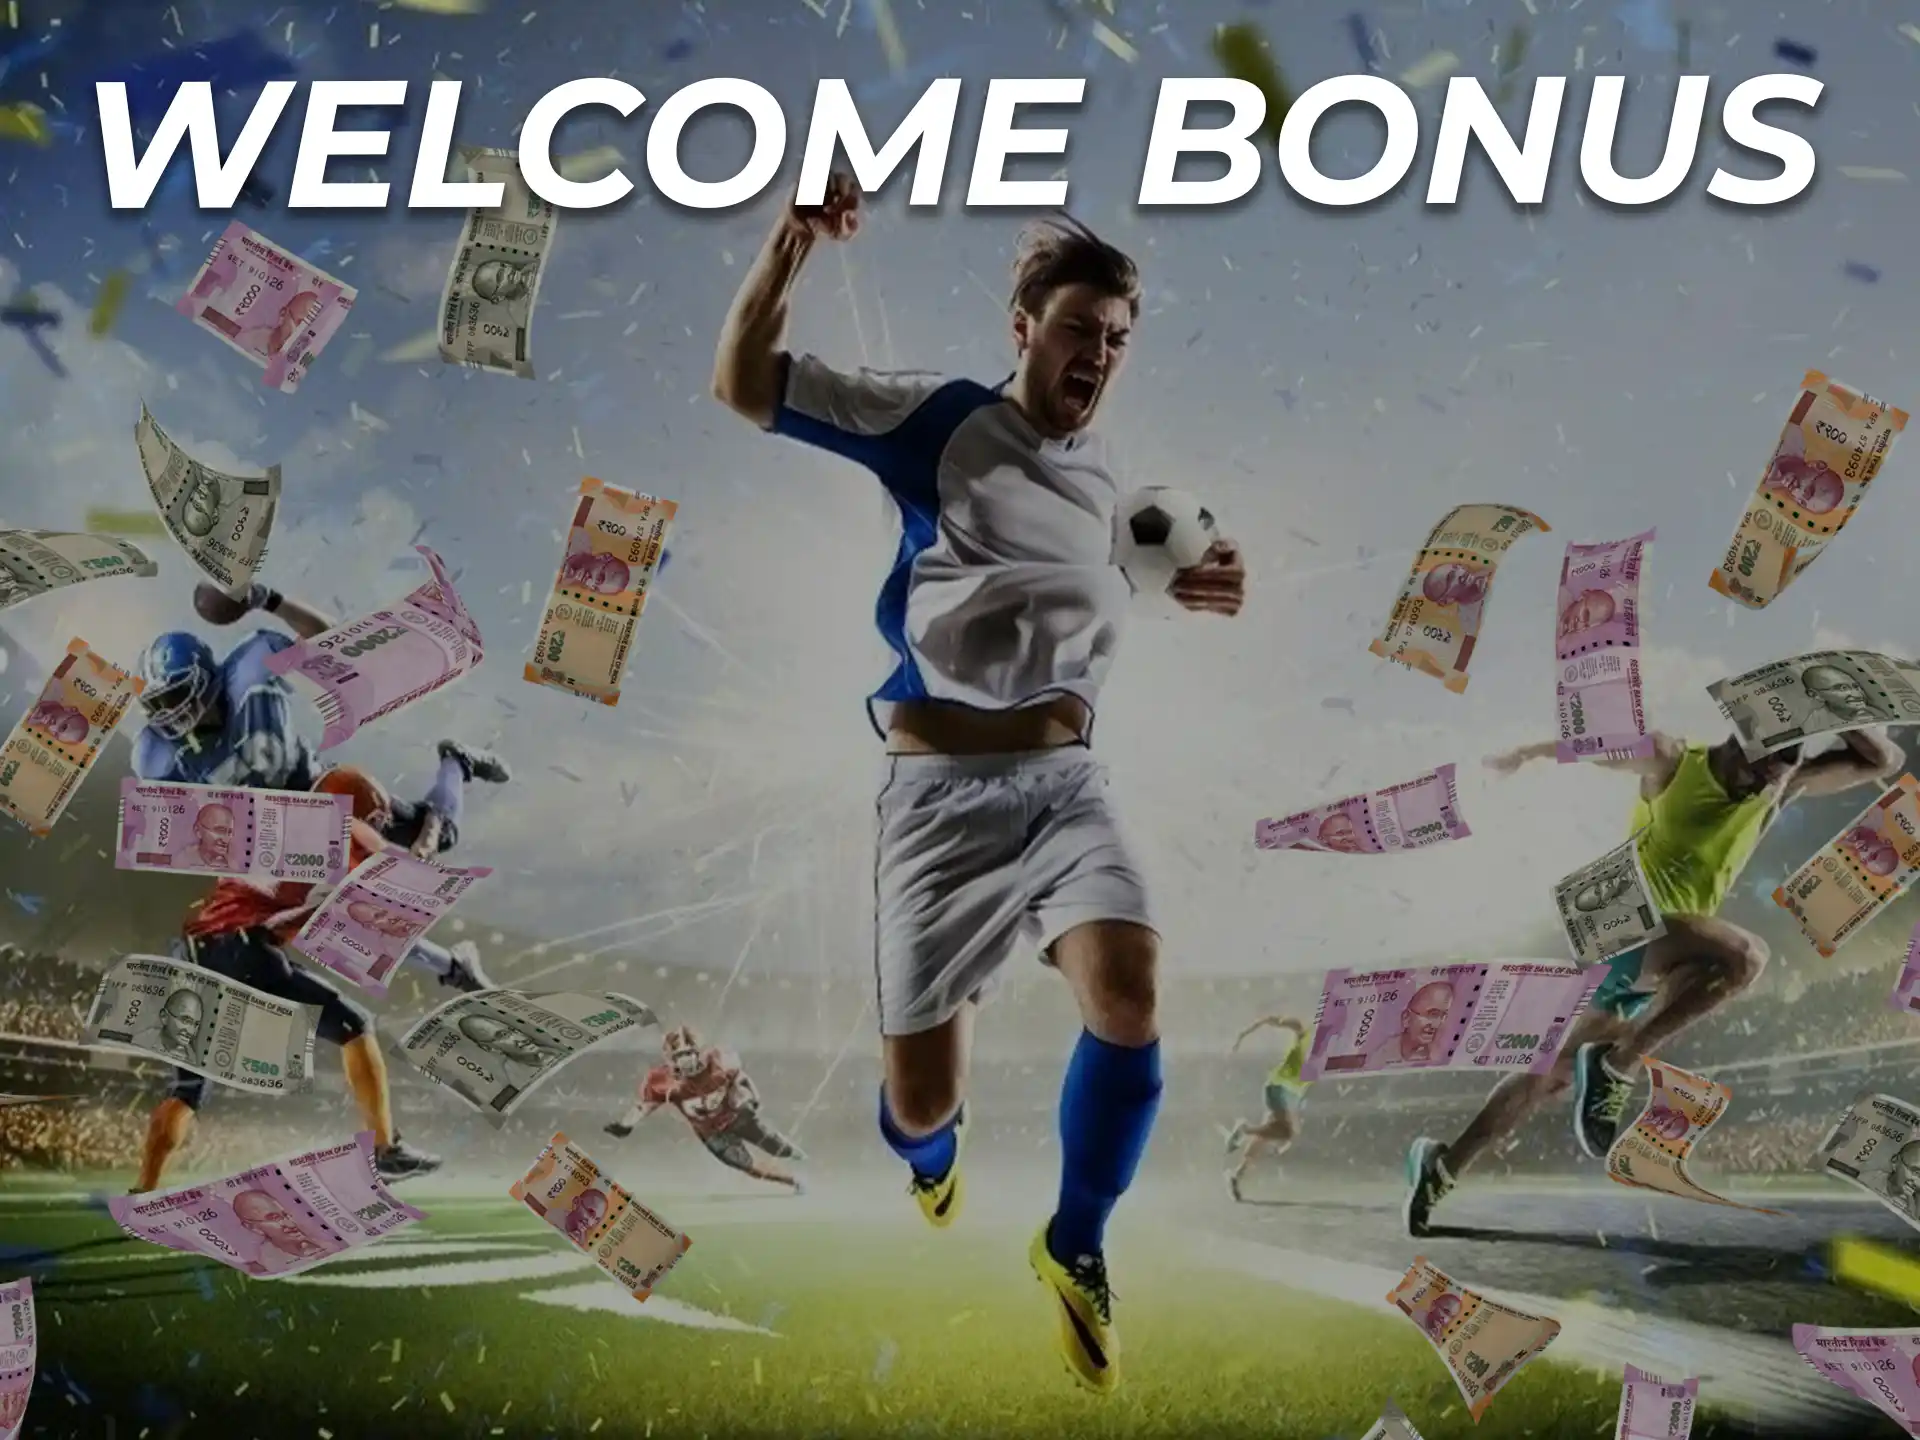 After registration, players can get a welcome bonus.